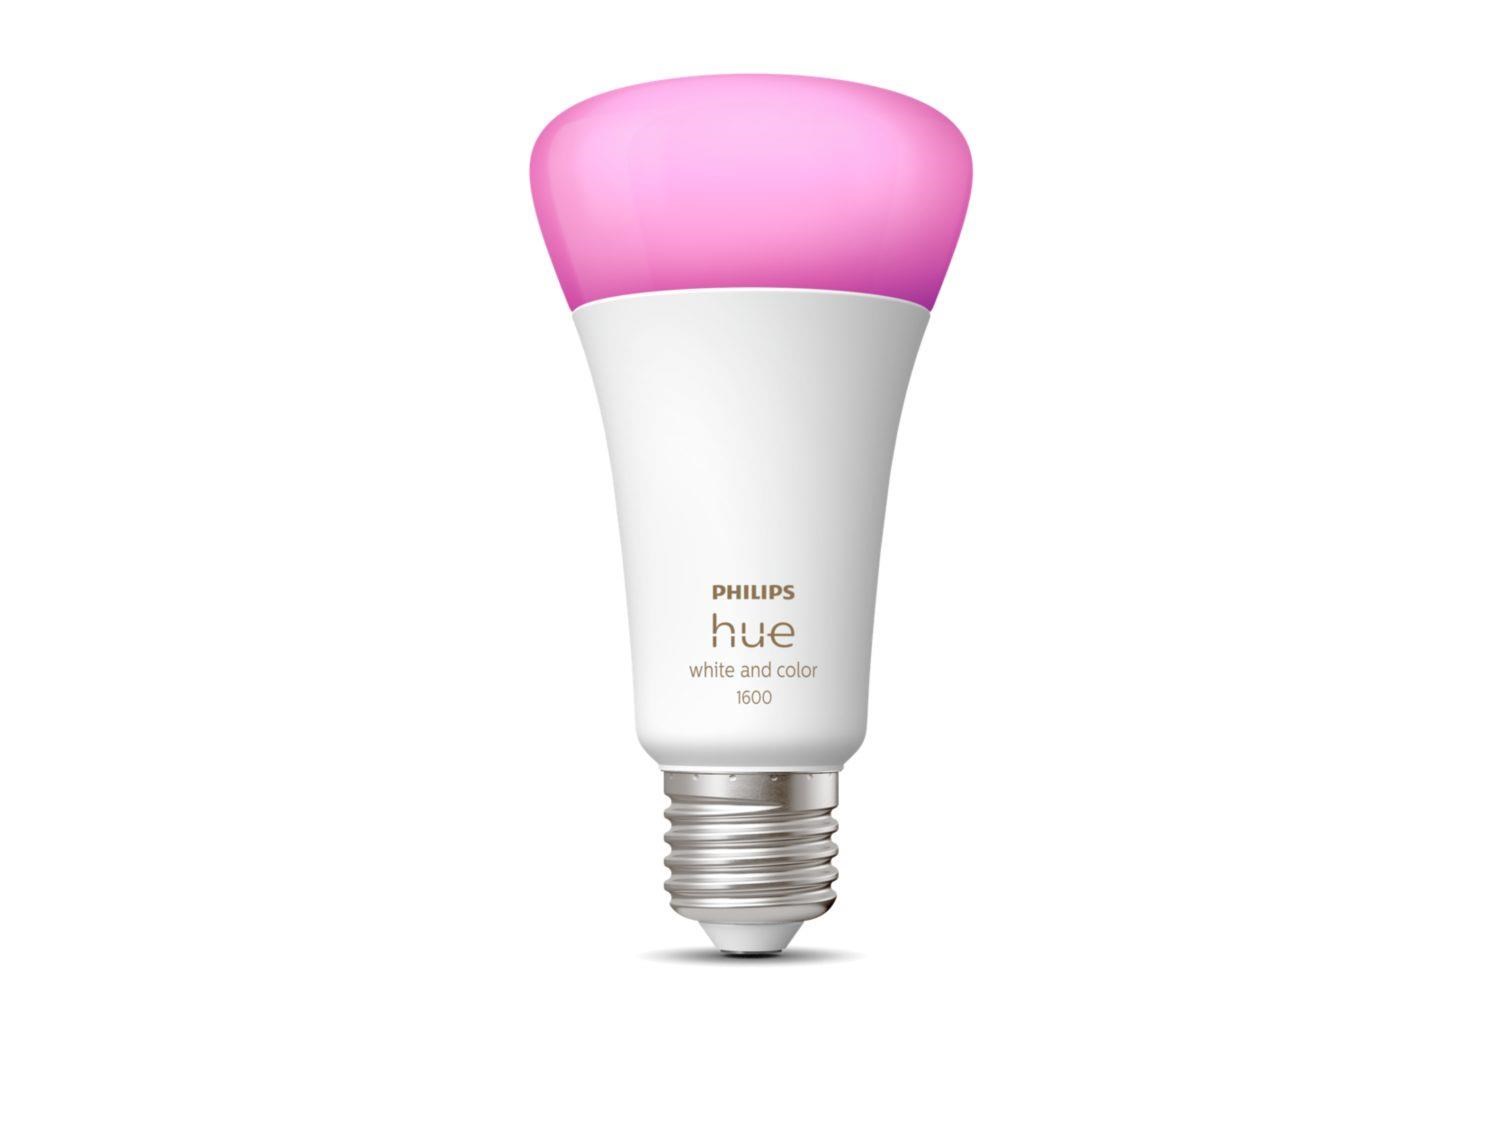 Philips Hue White and Color Ambiance 15W 1600 E27 929002471601